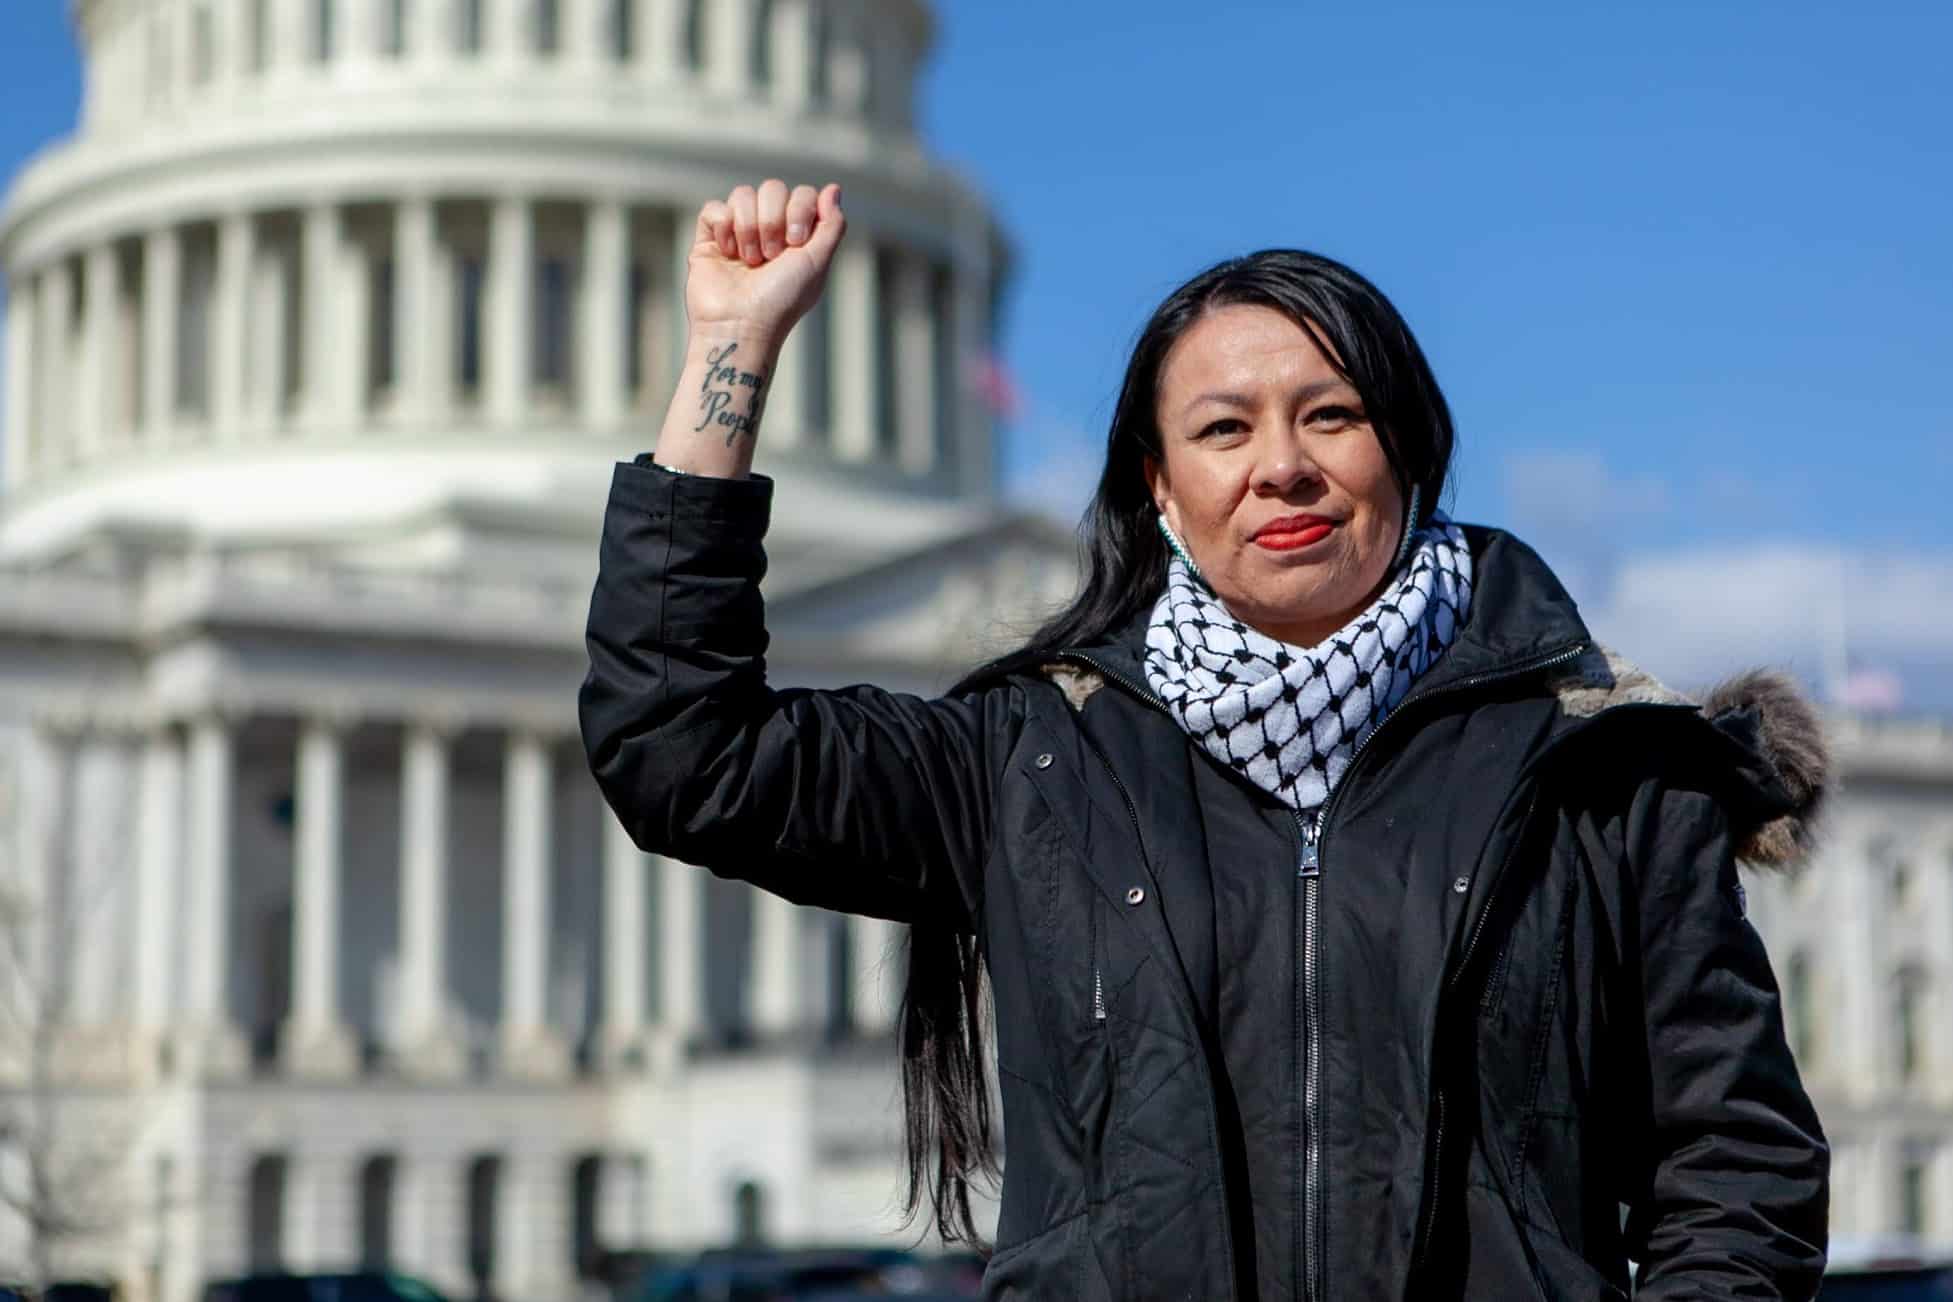 A woman raising a fist in protest in front of the U.S. Capitol